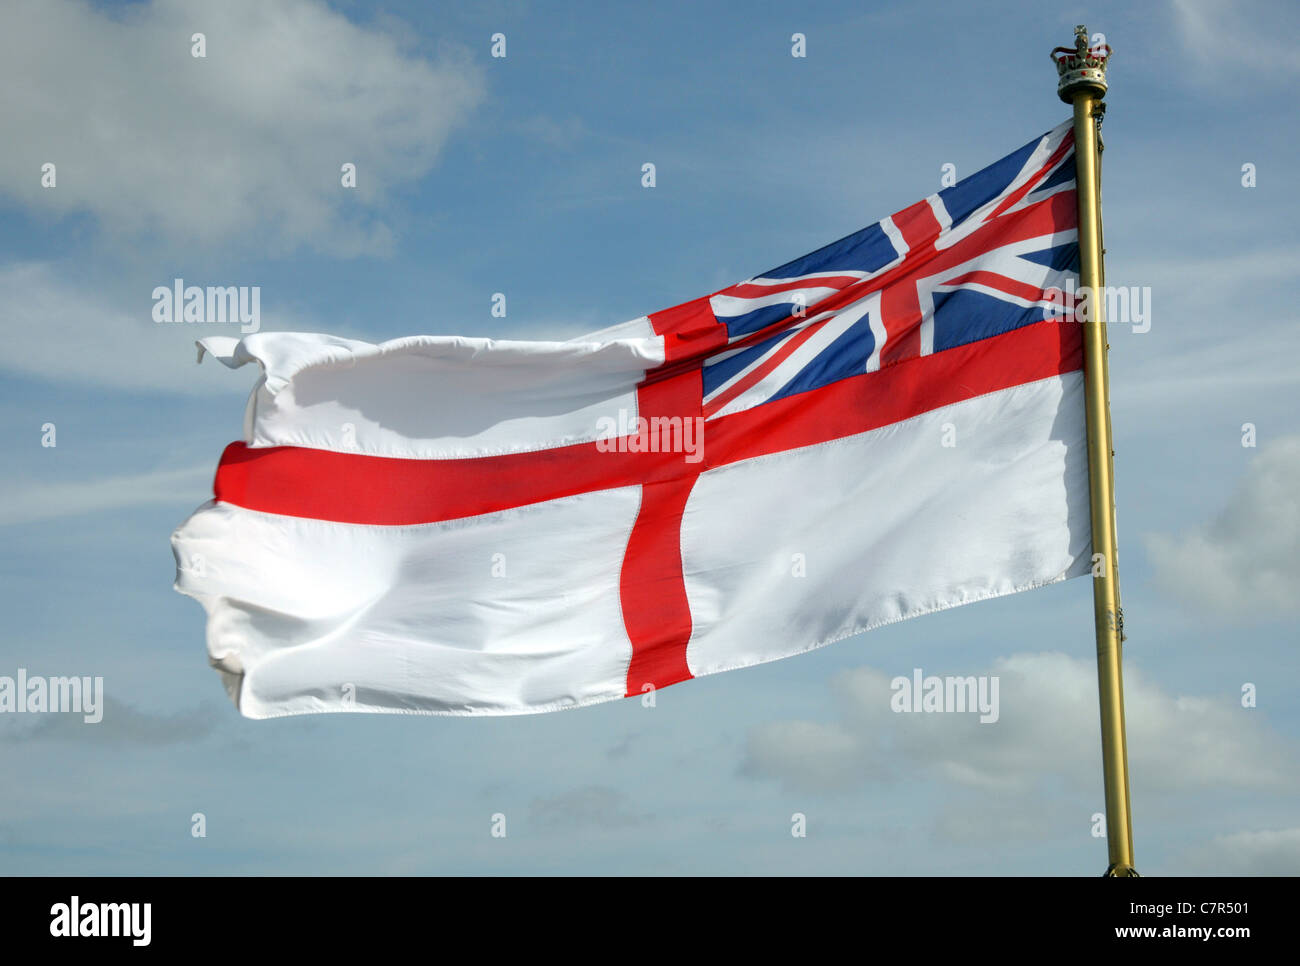 The Royal Navy White Ensign as flown from all Royal Navy warships. Stock Photo